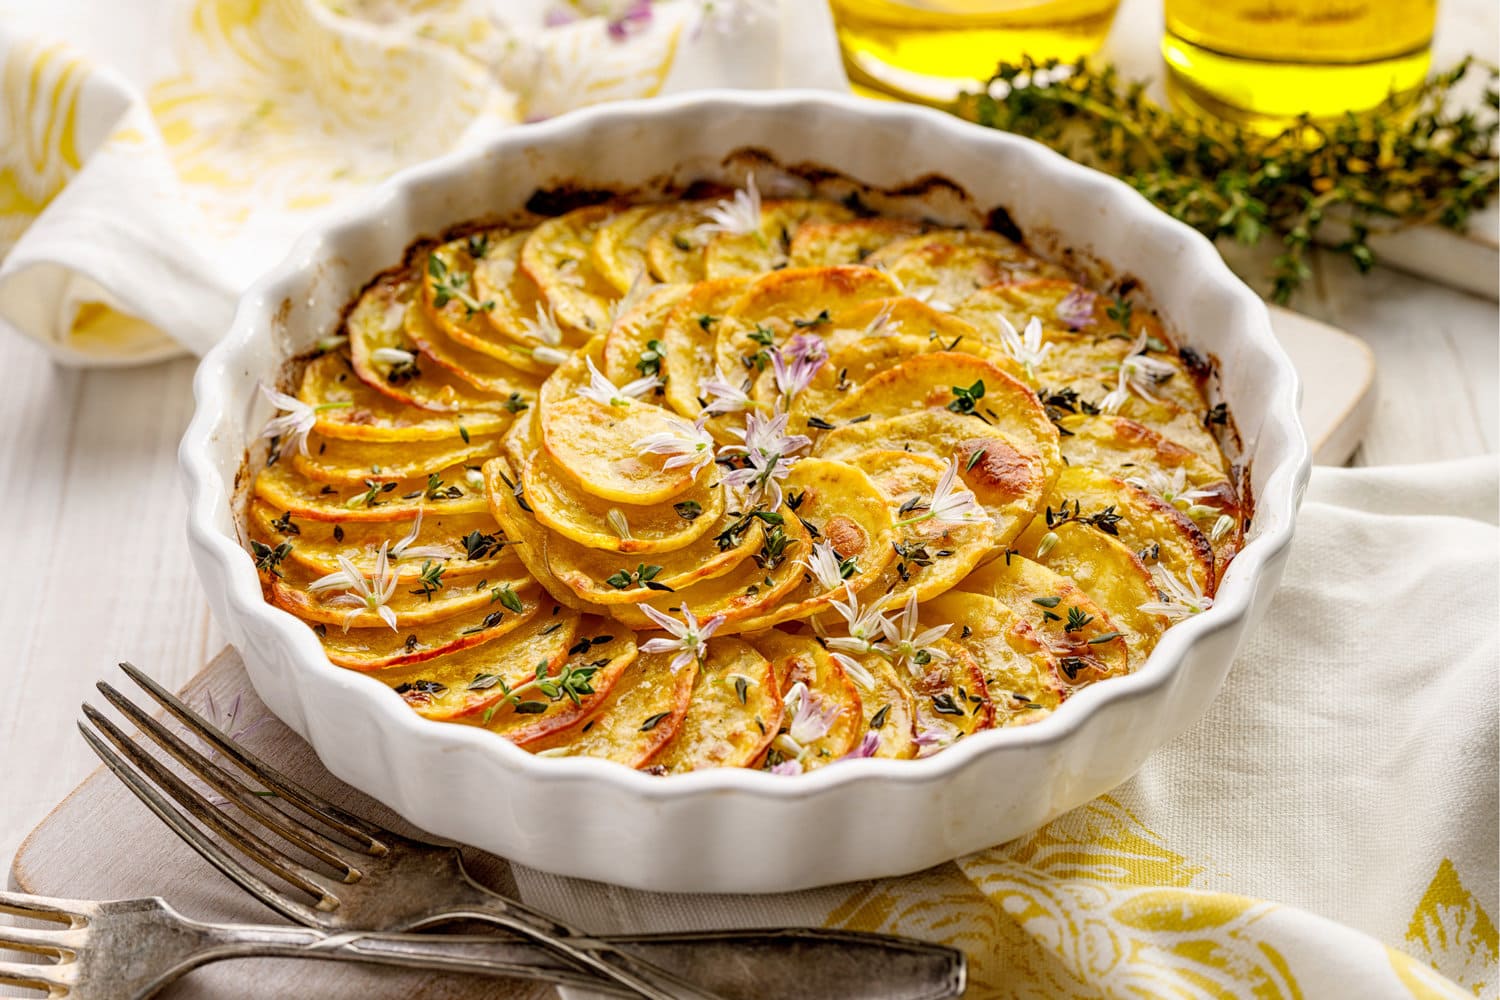 Scalloped potatoes, potato casserole with the addition of herbs and edible chives flowers in a ceramic baking dish